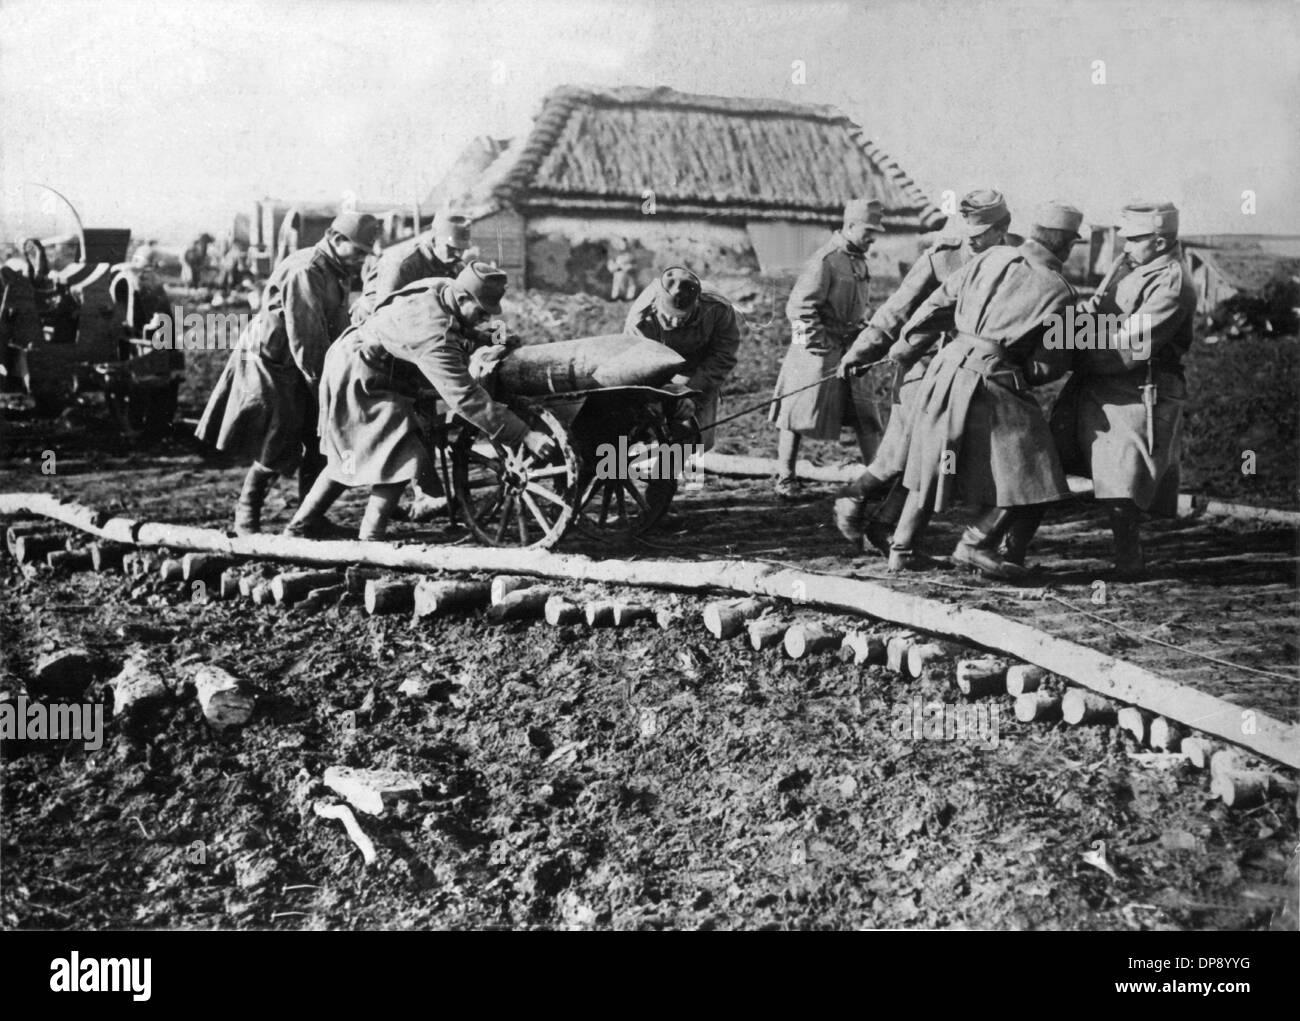 A bullet of 30, 5 centimetres is transported to a gun emplacement in Galicia by soldiers of the Austrian-Hungarian army. The deadly shots by Serbian nationalists on the Austrian heir to the throne Franz Ferdinand on the 28th of June in 1914 in Sarajevo caused the outbreak of the Great War, later to be called World War I, in August 1914. The Central Powers, namely Germany, Austria-Hungary and as well later the Ottoman Empire (Turkey) and Bulgaria against the Triple Entente, consisting of Great Britain, France and Russia, as well as numerous allies. The sad result of World War I, which ended wi Stock Photo